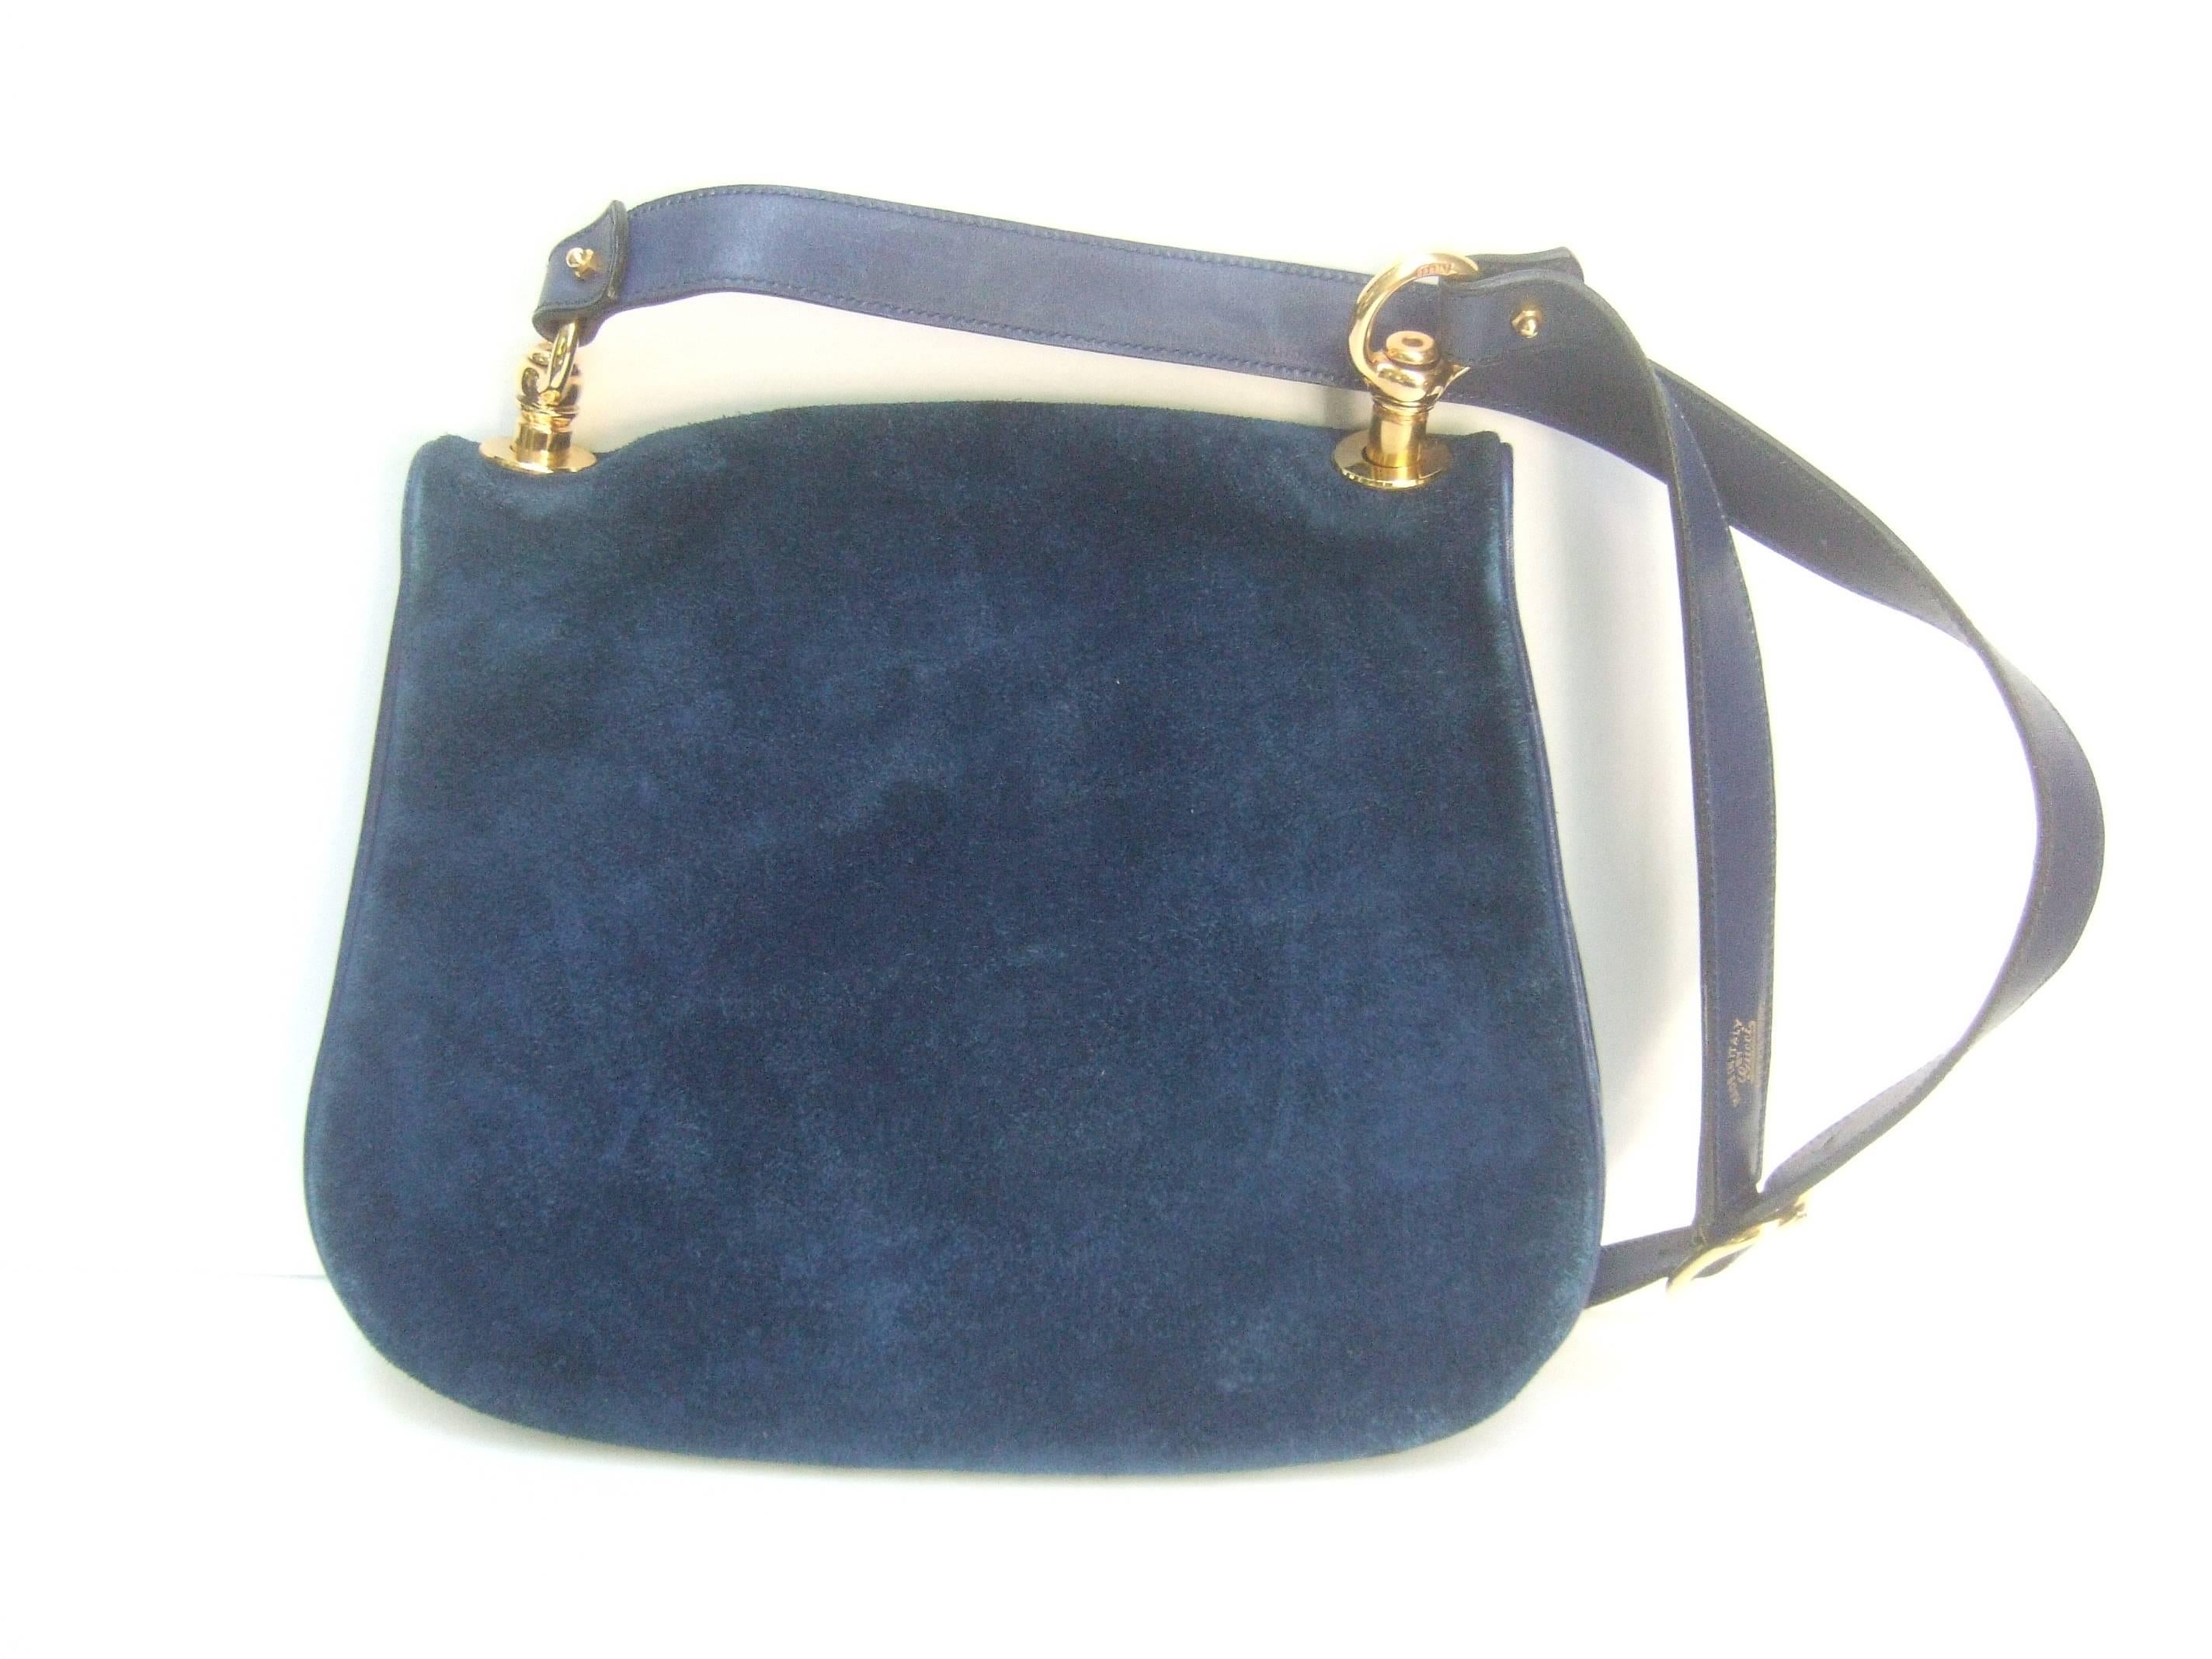 Gucci Italy Rare Midnight Blue Suede Shoulder Bag c 1970s 3